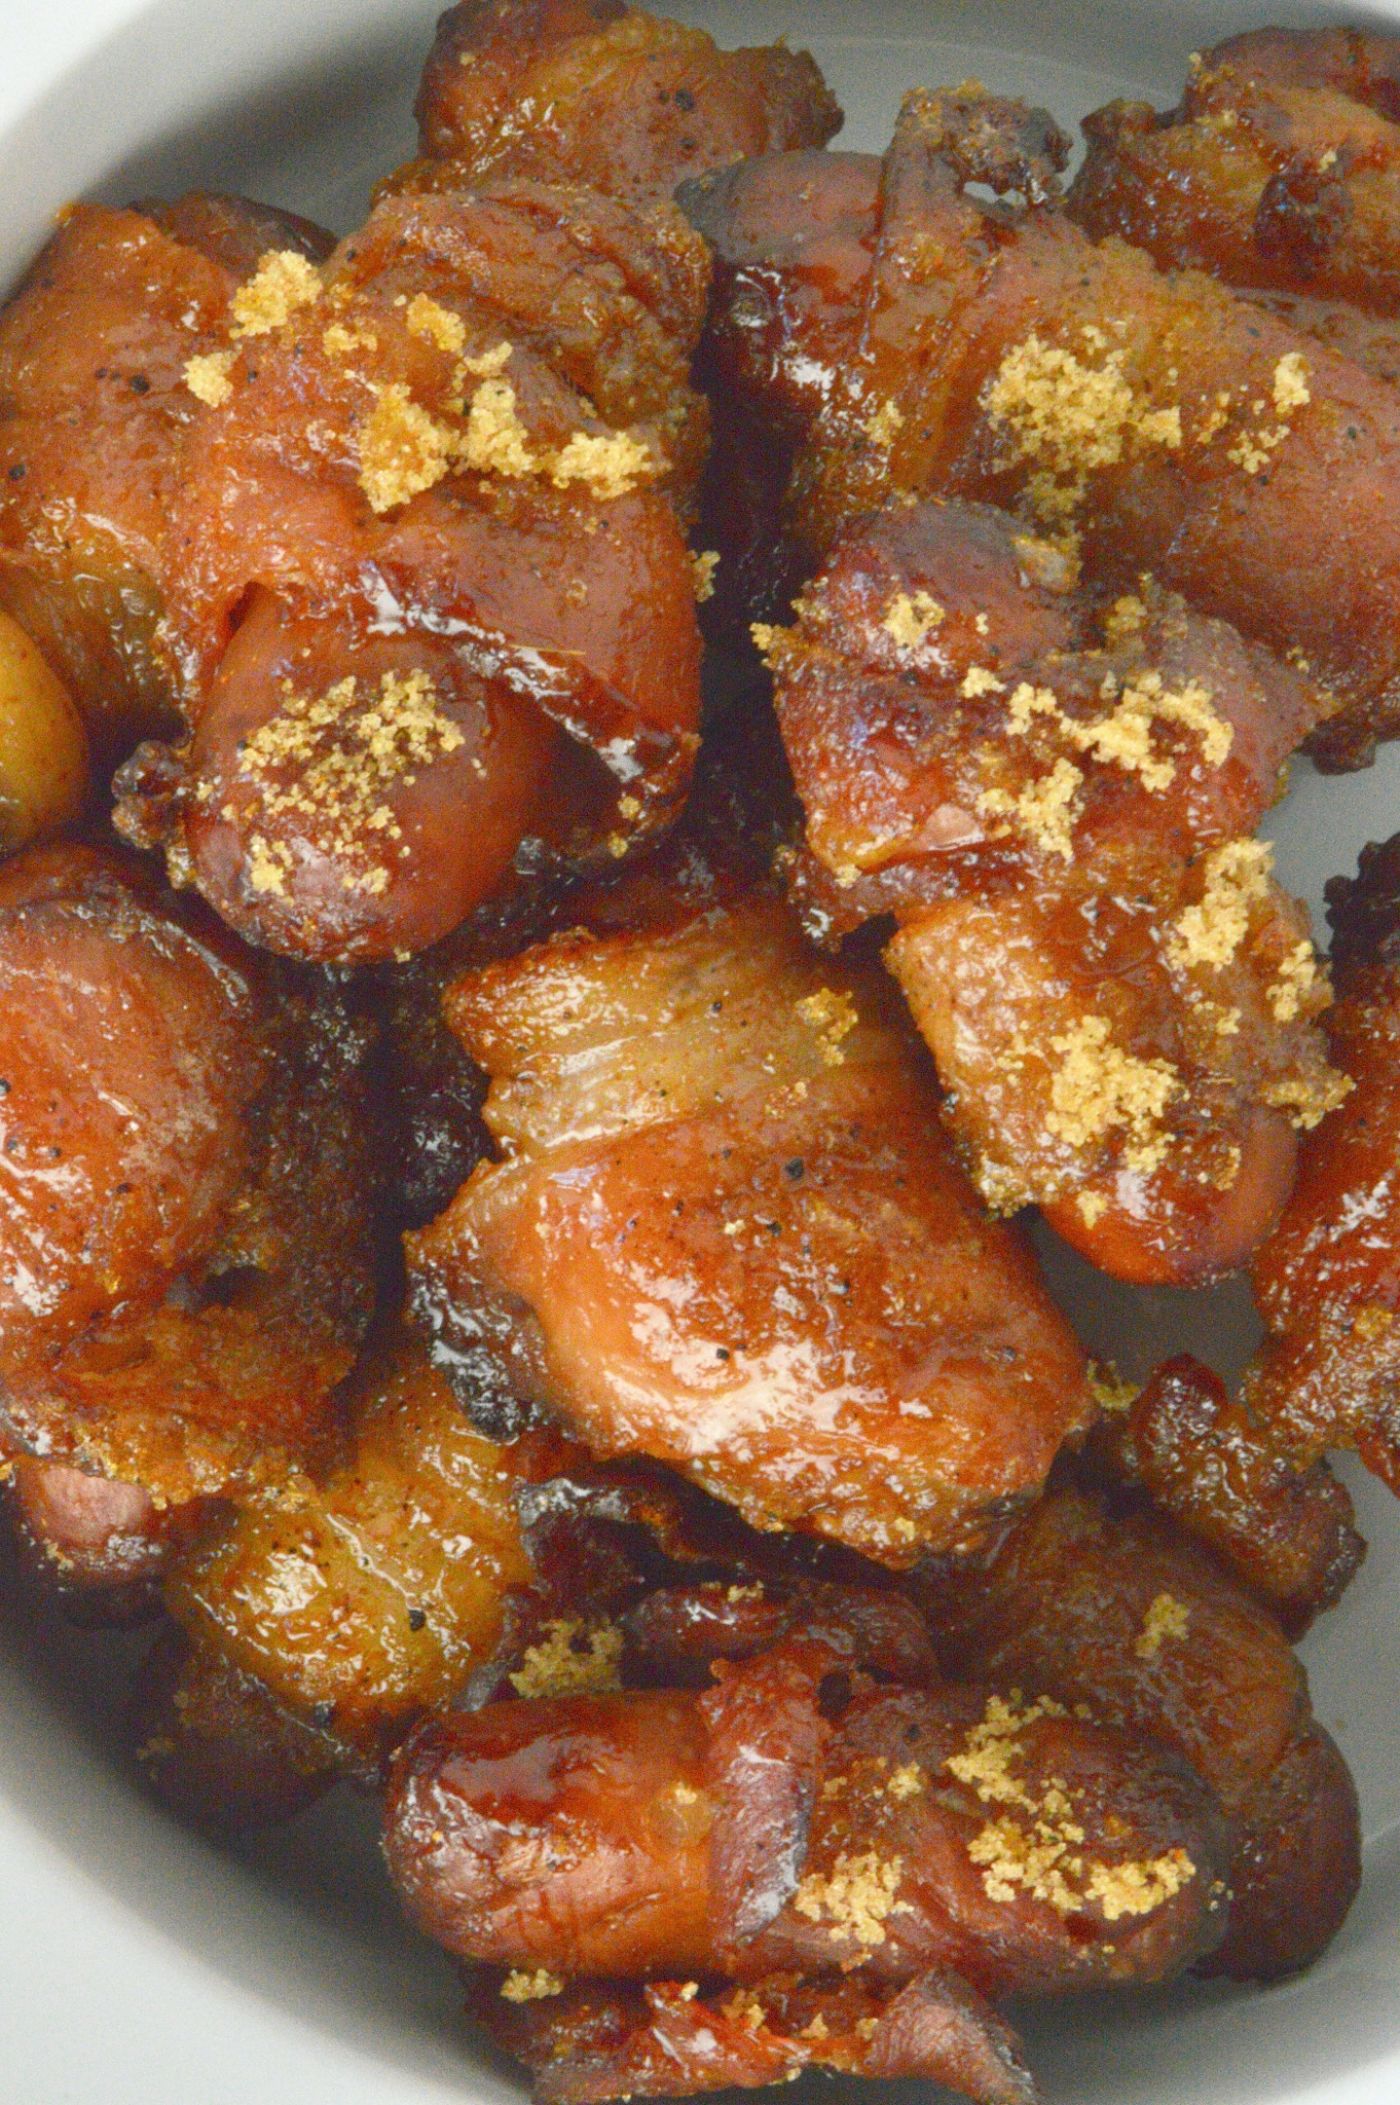 Bowl of smokies Spicy Sugar Bacon Smokies!!  Crispy Bacon wrapped smokies are a bite sized treat that have a brown sugar coat that has a hint of spiciness!  Perfect for game-day snacks or any casual cocktail party.